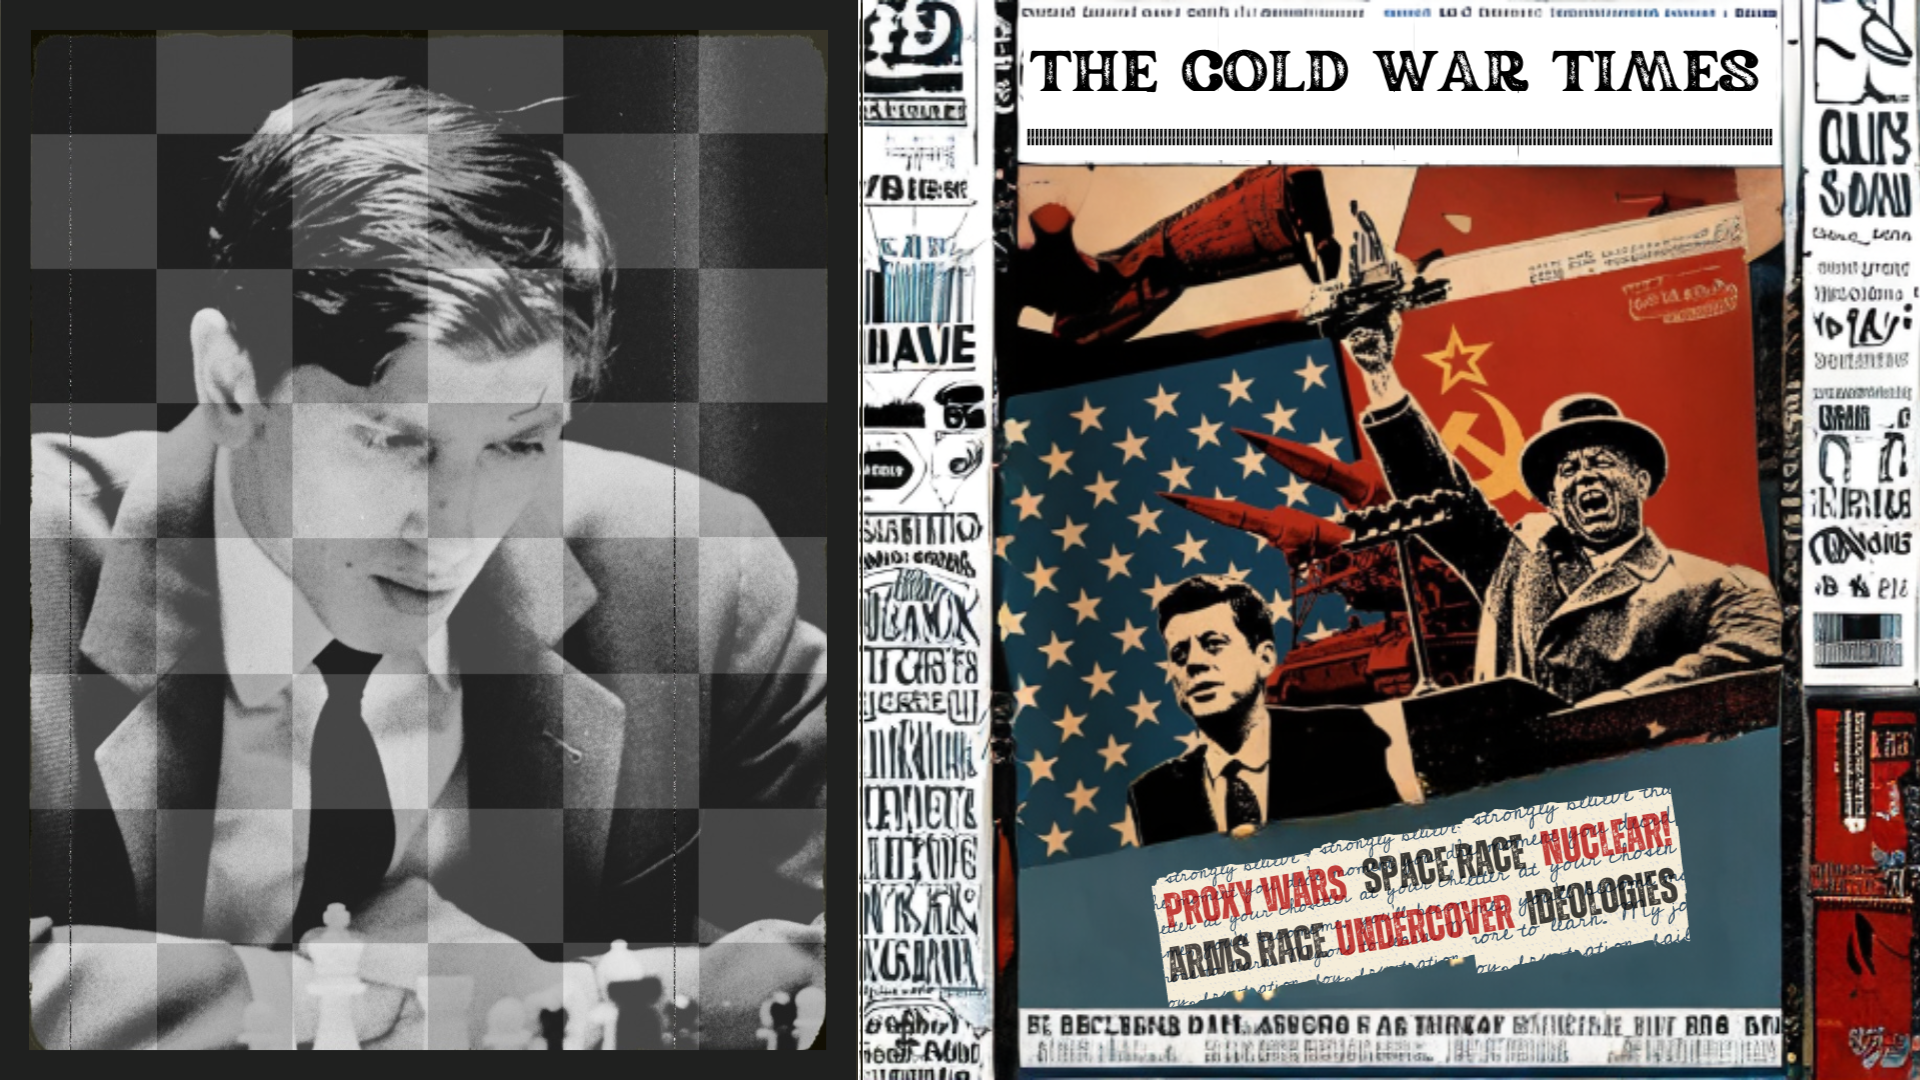 Bobby Fischer  The Cold War on a chessboard - Telegraph India